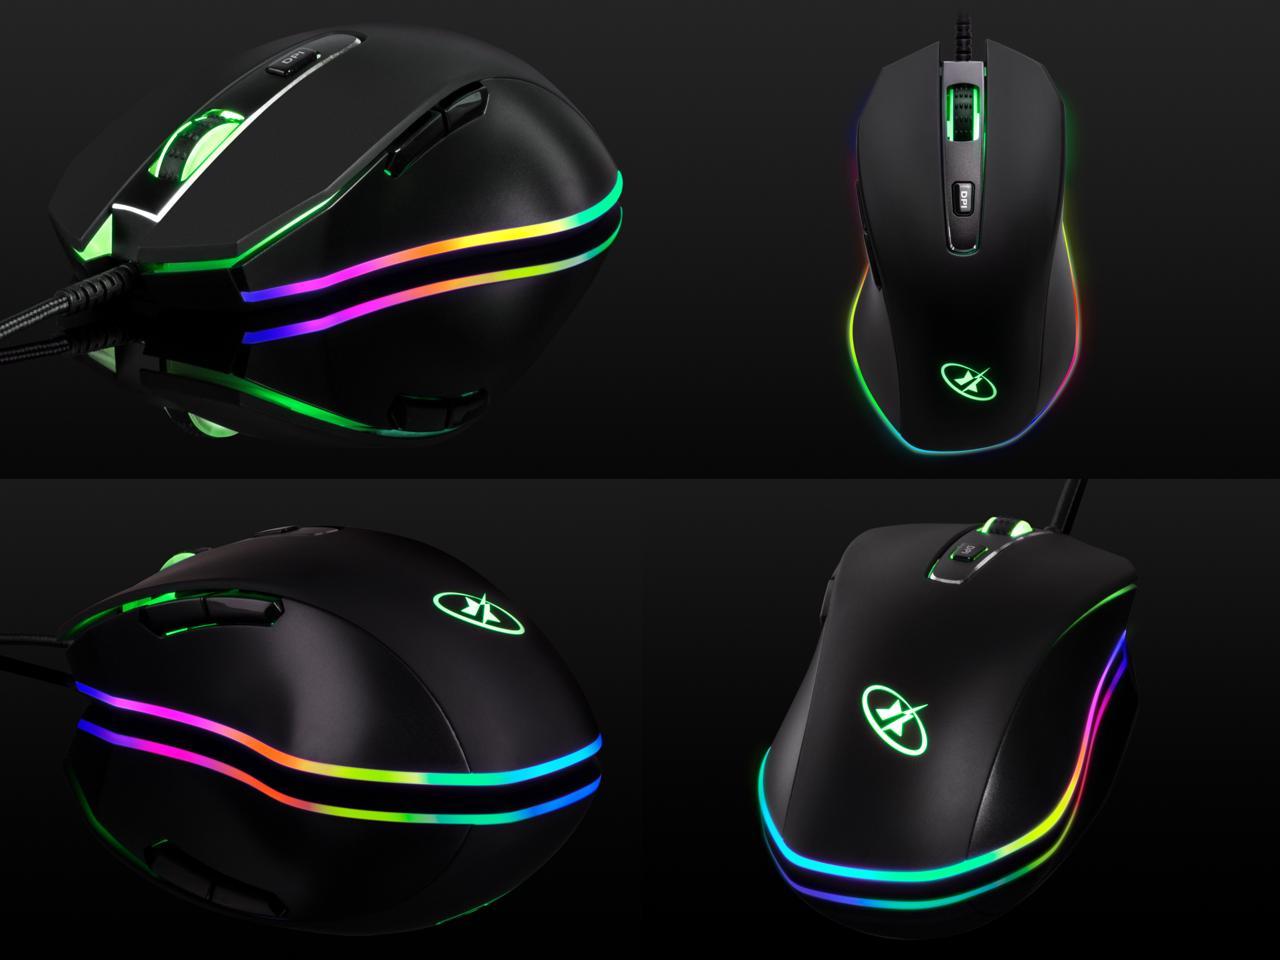 Rosewill NEON M59 RGB Gaming Mouse, 10000 dpi, Ergonomic Hand Grips